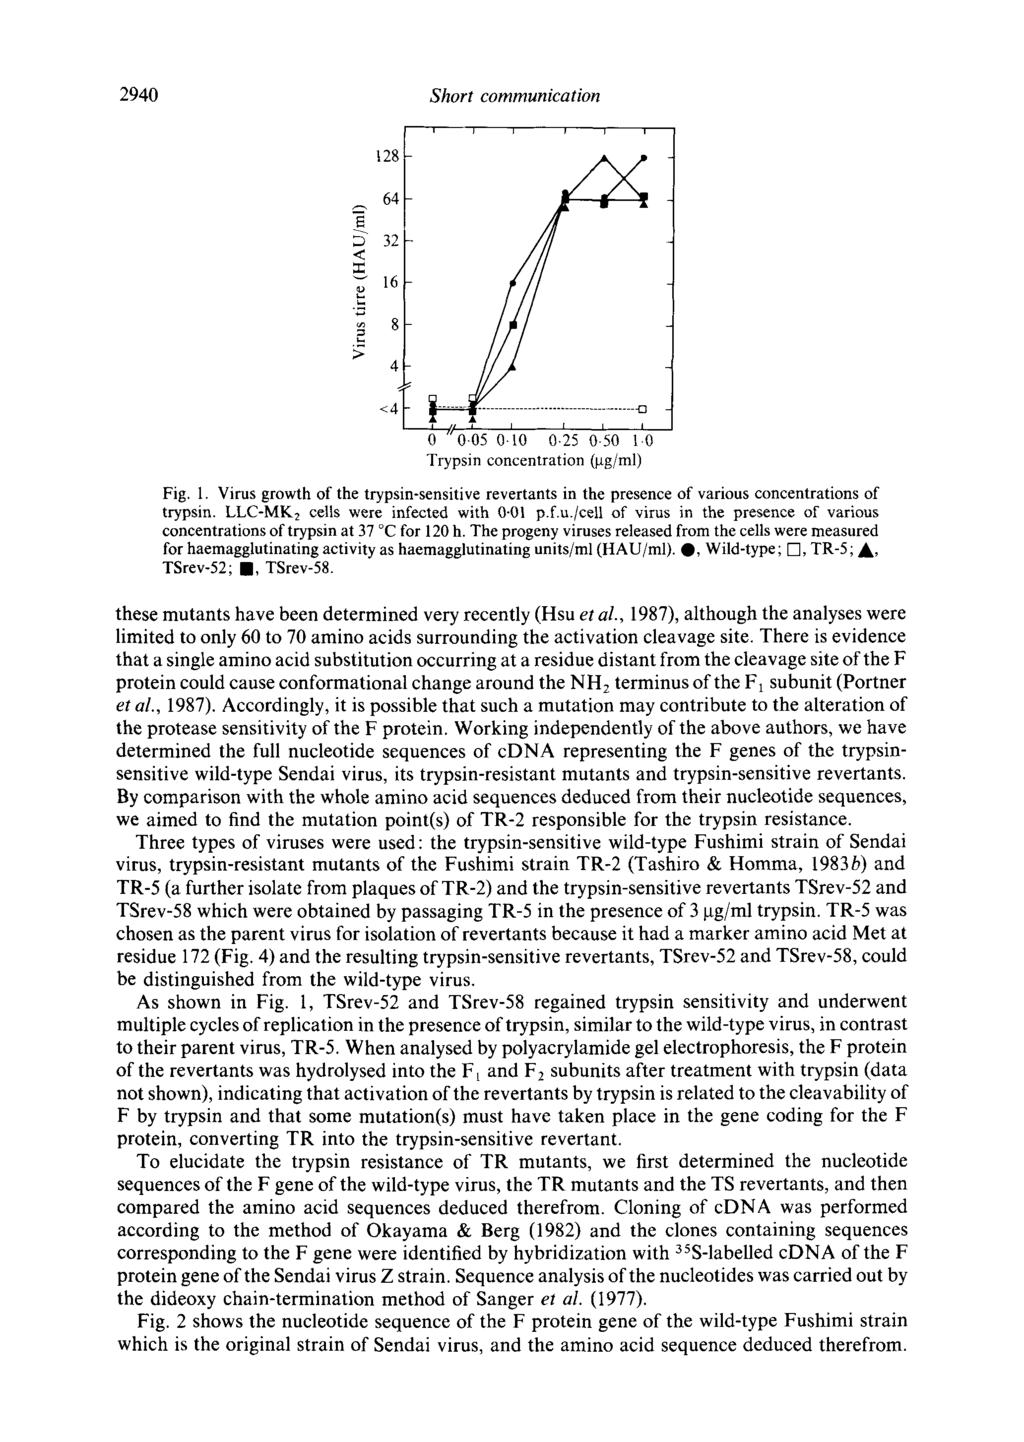 2940 Short communication t28 i l i J i i 64 < 32 m v 16 -,~ ~ 8 4 <4... I ; //0-05 O-'lO 0-25 0.50 1.0 Trypsin concentration (gg/ml) Fig. 1. Virus growth of the trypsin-sensitive revertants in the presence of various concentrations of trypsin.